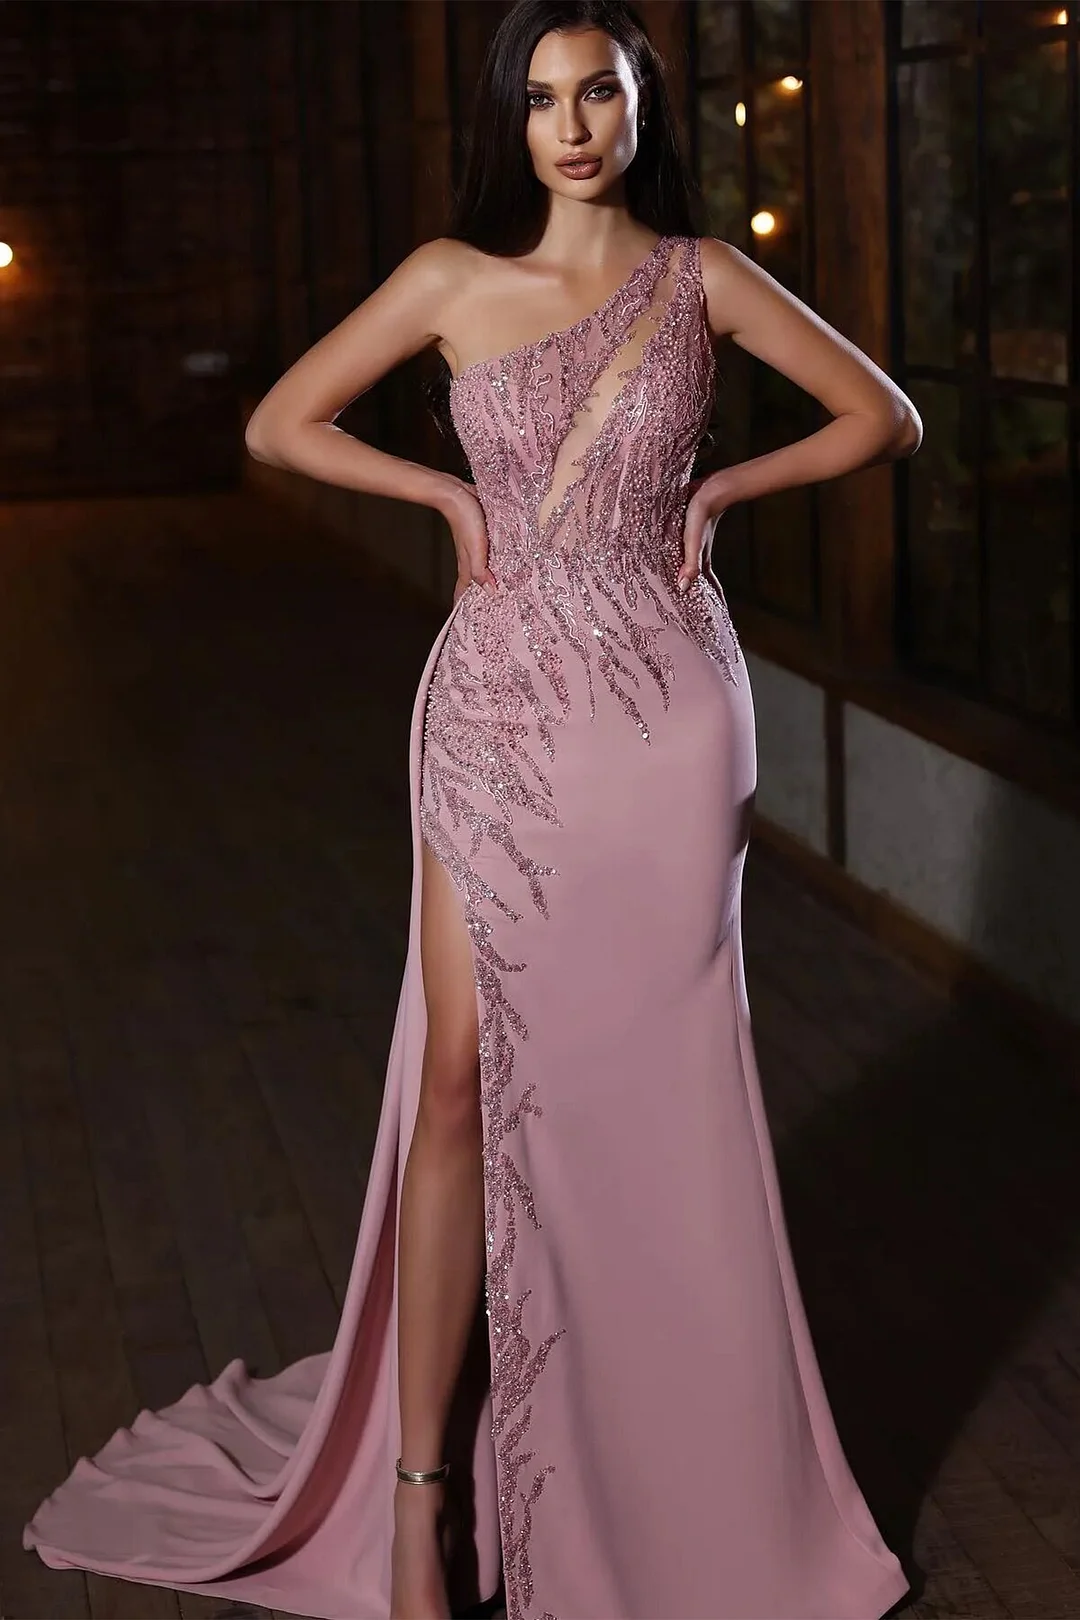 Modern One Shoulder Pink Prom Dress Mermaid Long Slit WIth Beads Sequins - lulusllly